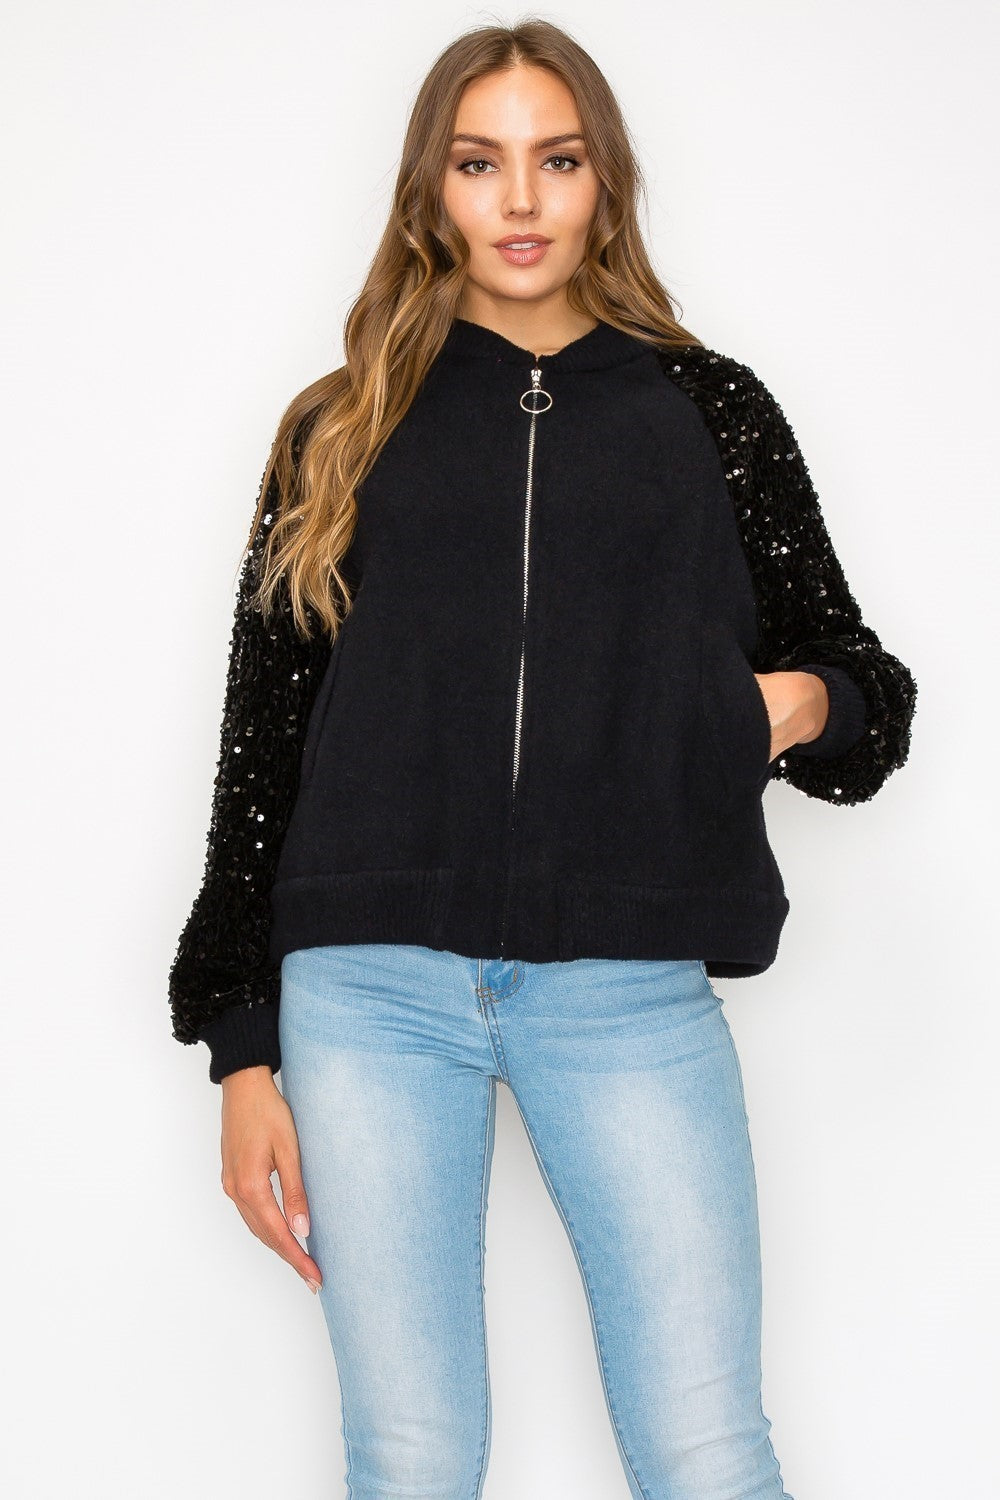 Jeanette Knitted Jacket with Sequin